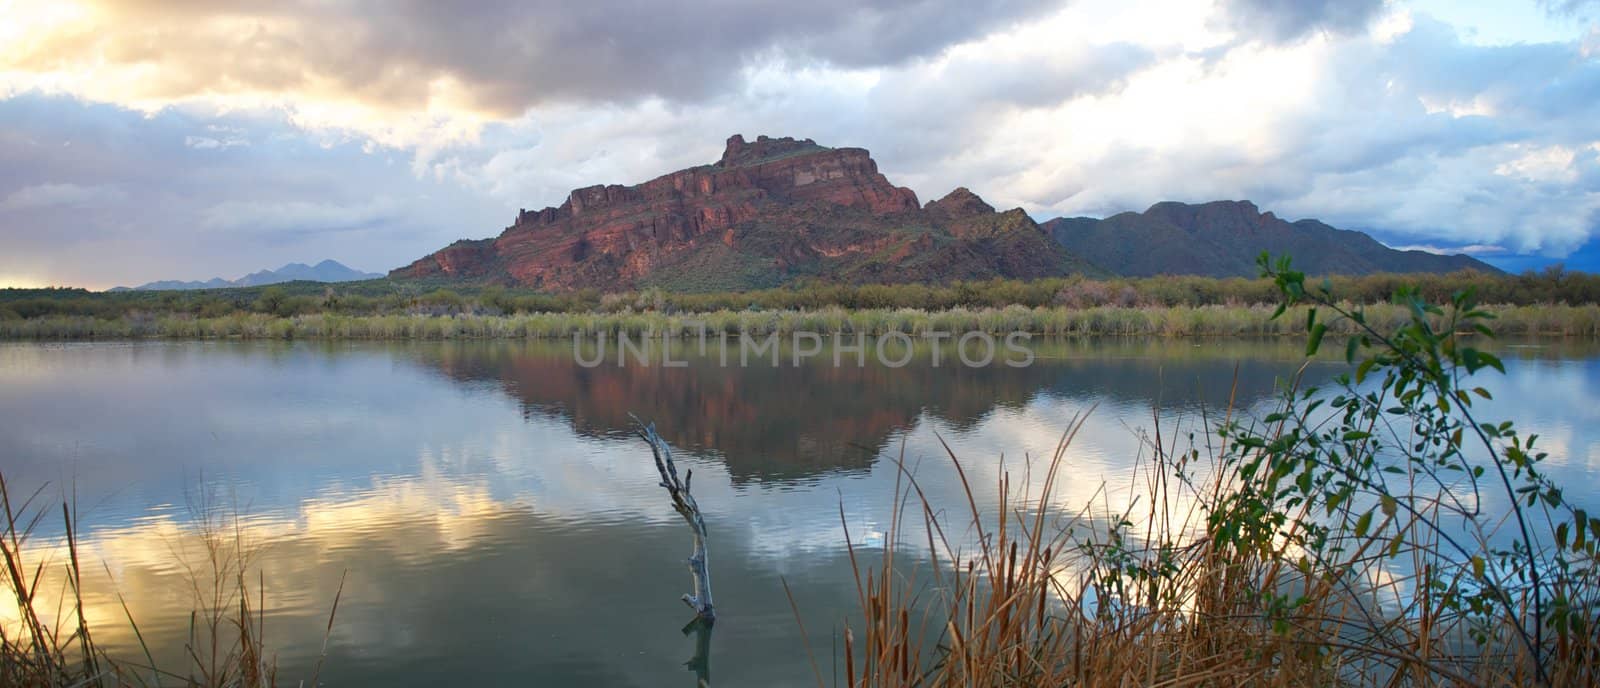 Beautiful Green Desert Mountains with calm river and rain clouds by pixelsnap